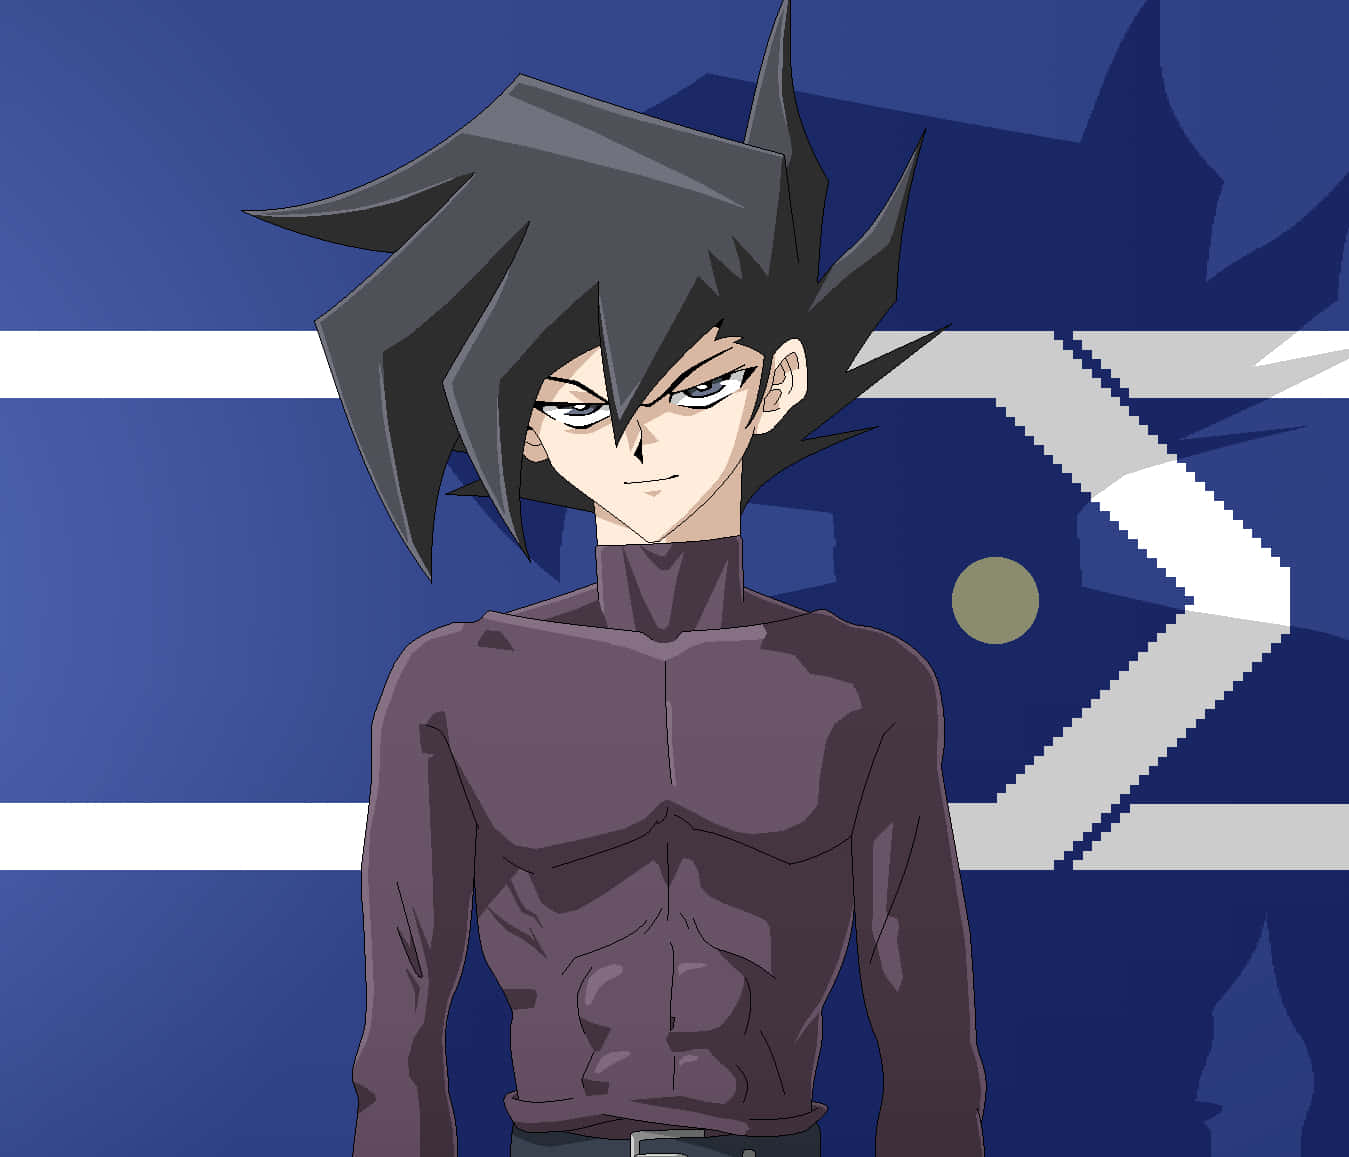 Chazz Princeton, the Duel Master Wallpaper